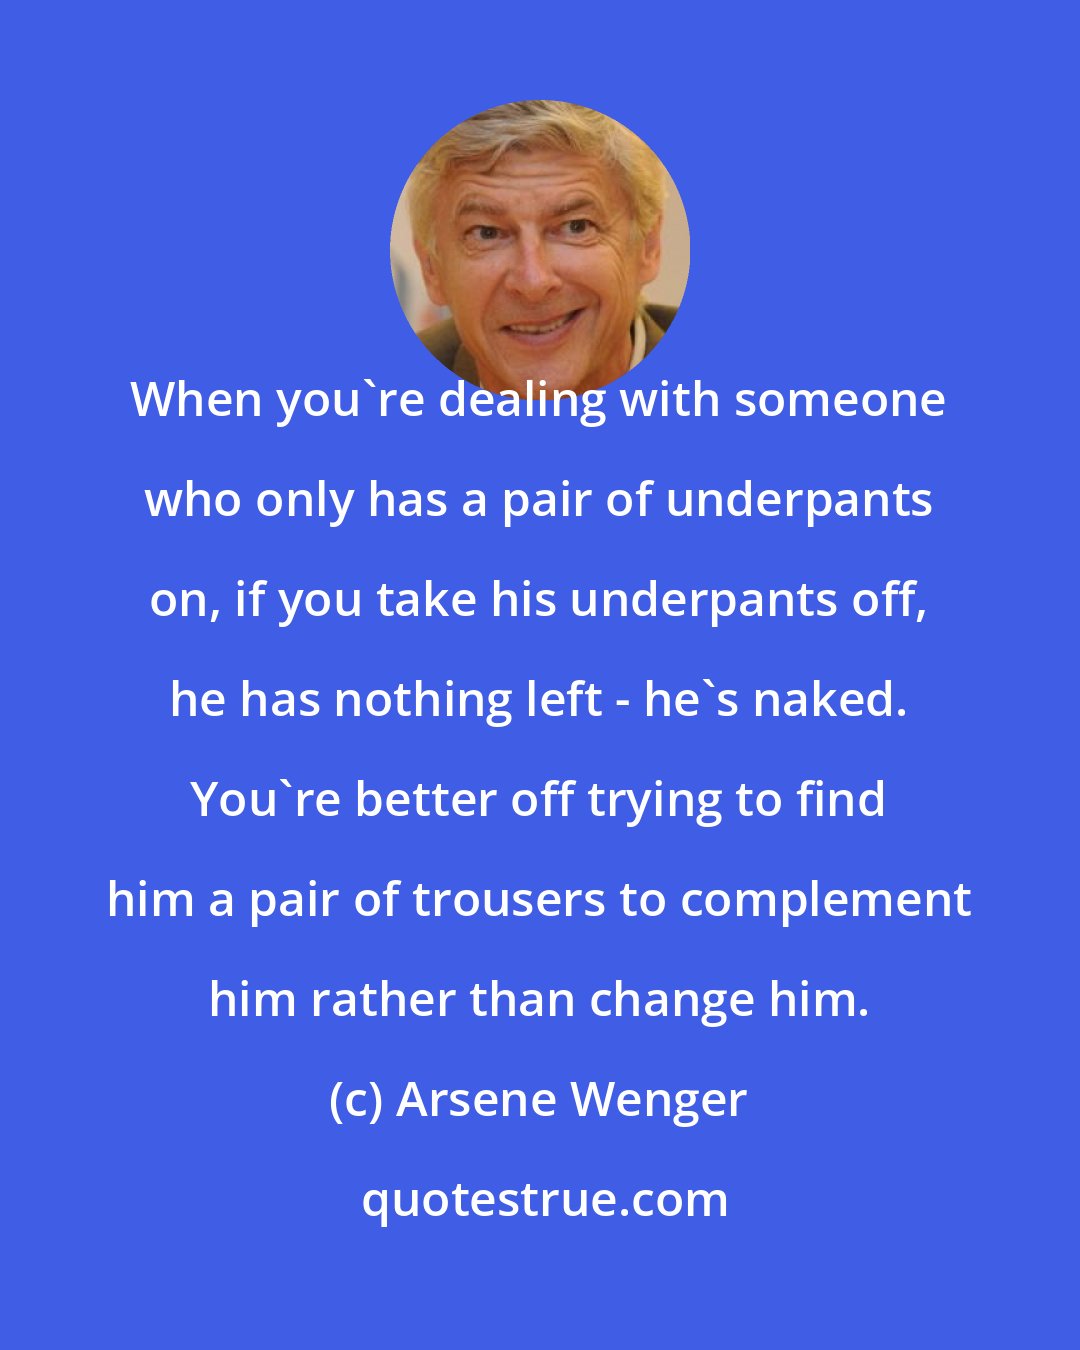 Arsene Wenger: When you're dealing with someone who only has a pair of underpants on, if you take his underpants off, he has nothing left - he's naked. You're better off trying to find him a pair of trousers to complement him rather than change him.